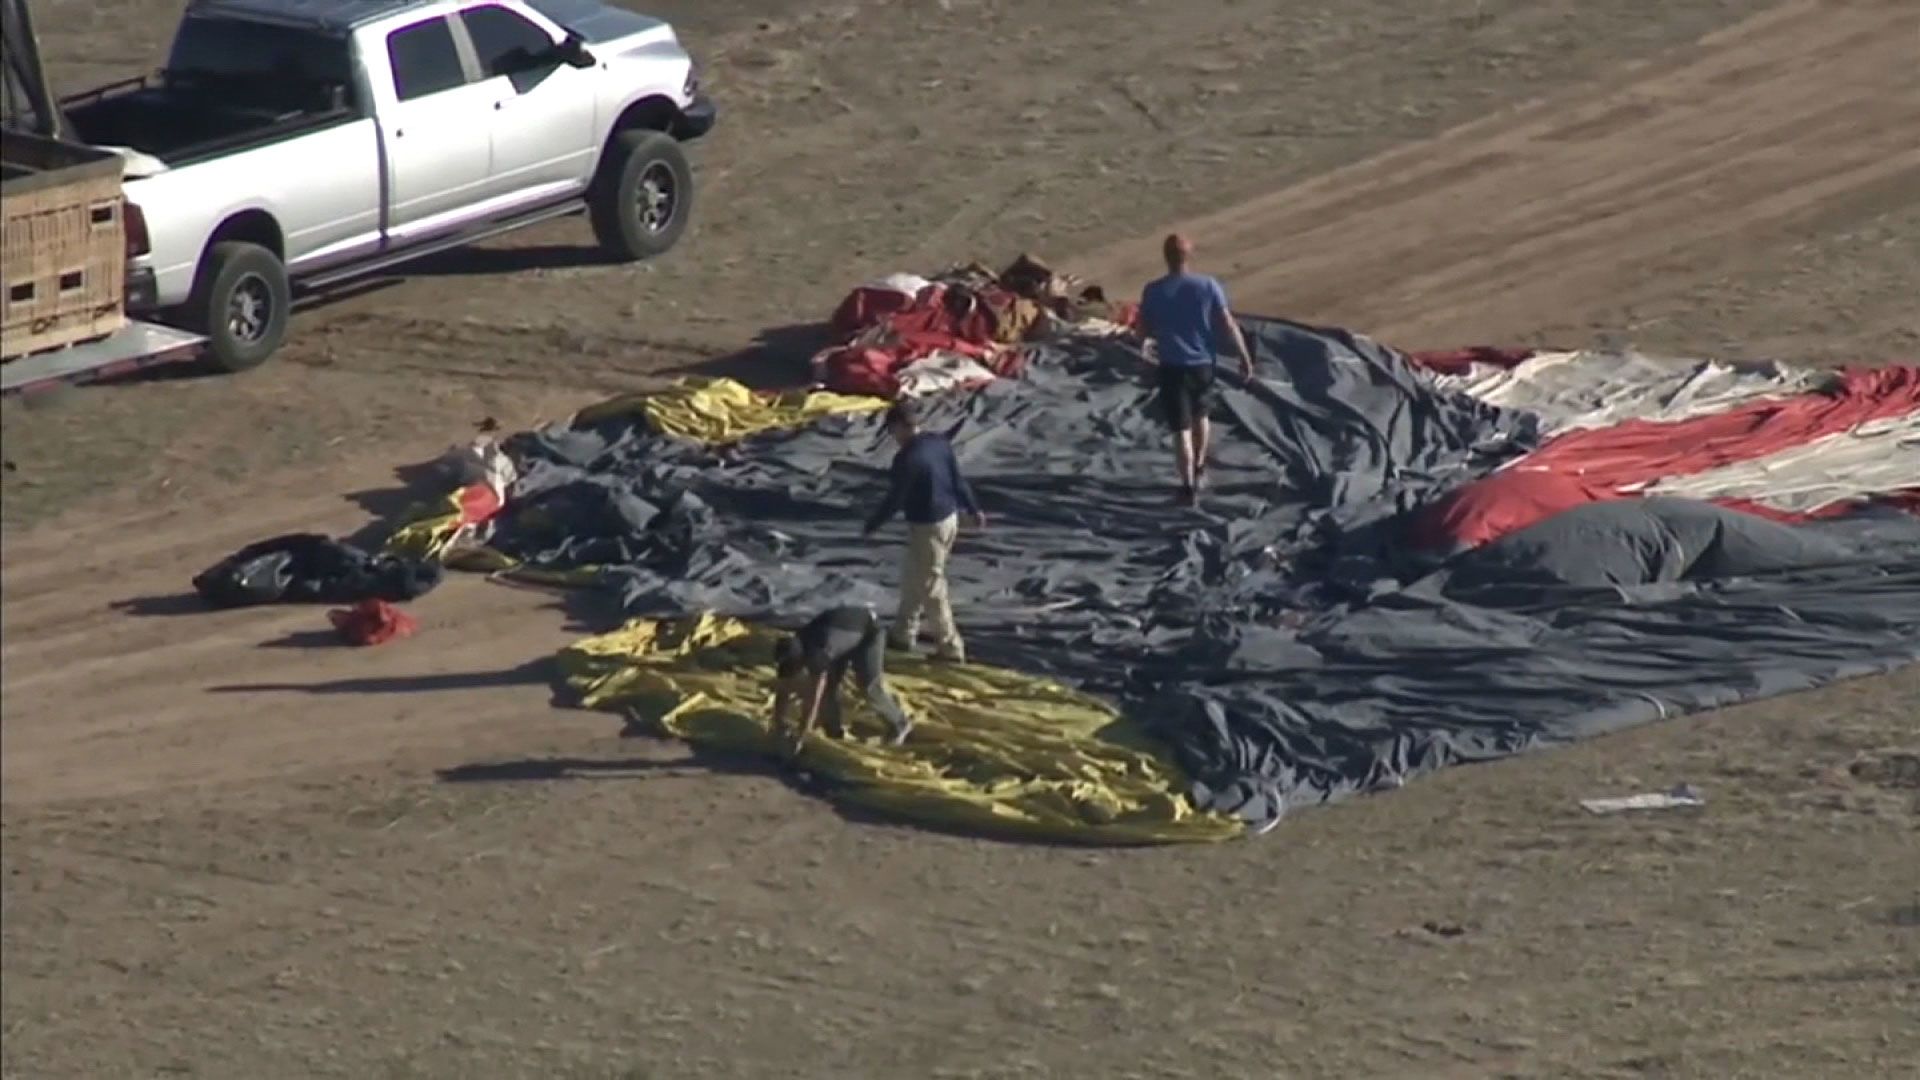 Four people were killed and one person was critically injured due to a hot air balloon crash in Elo...